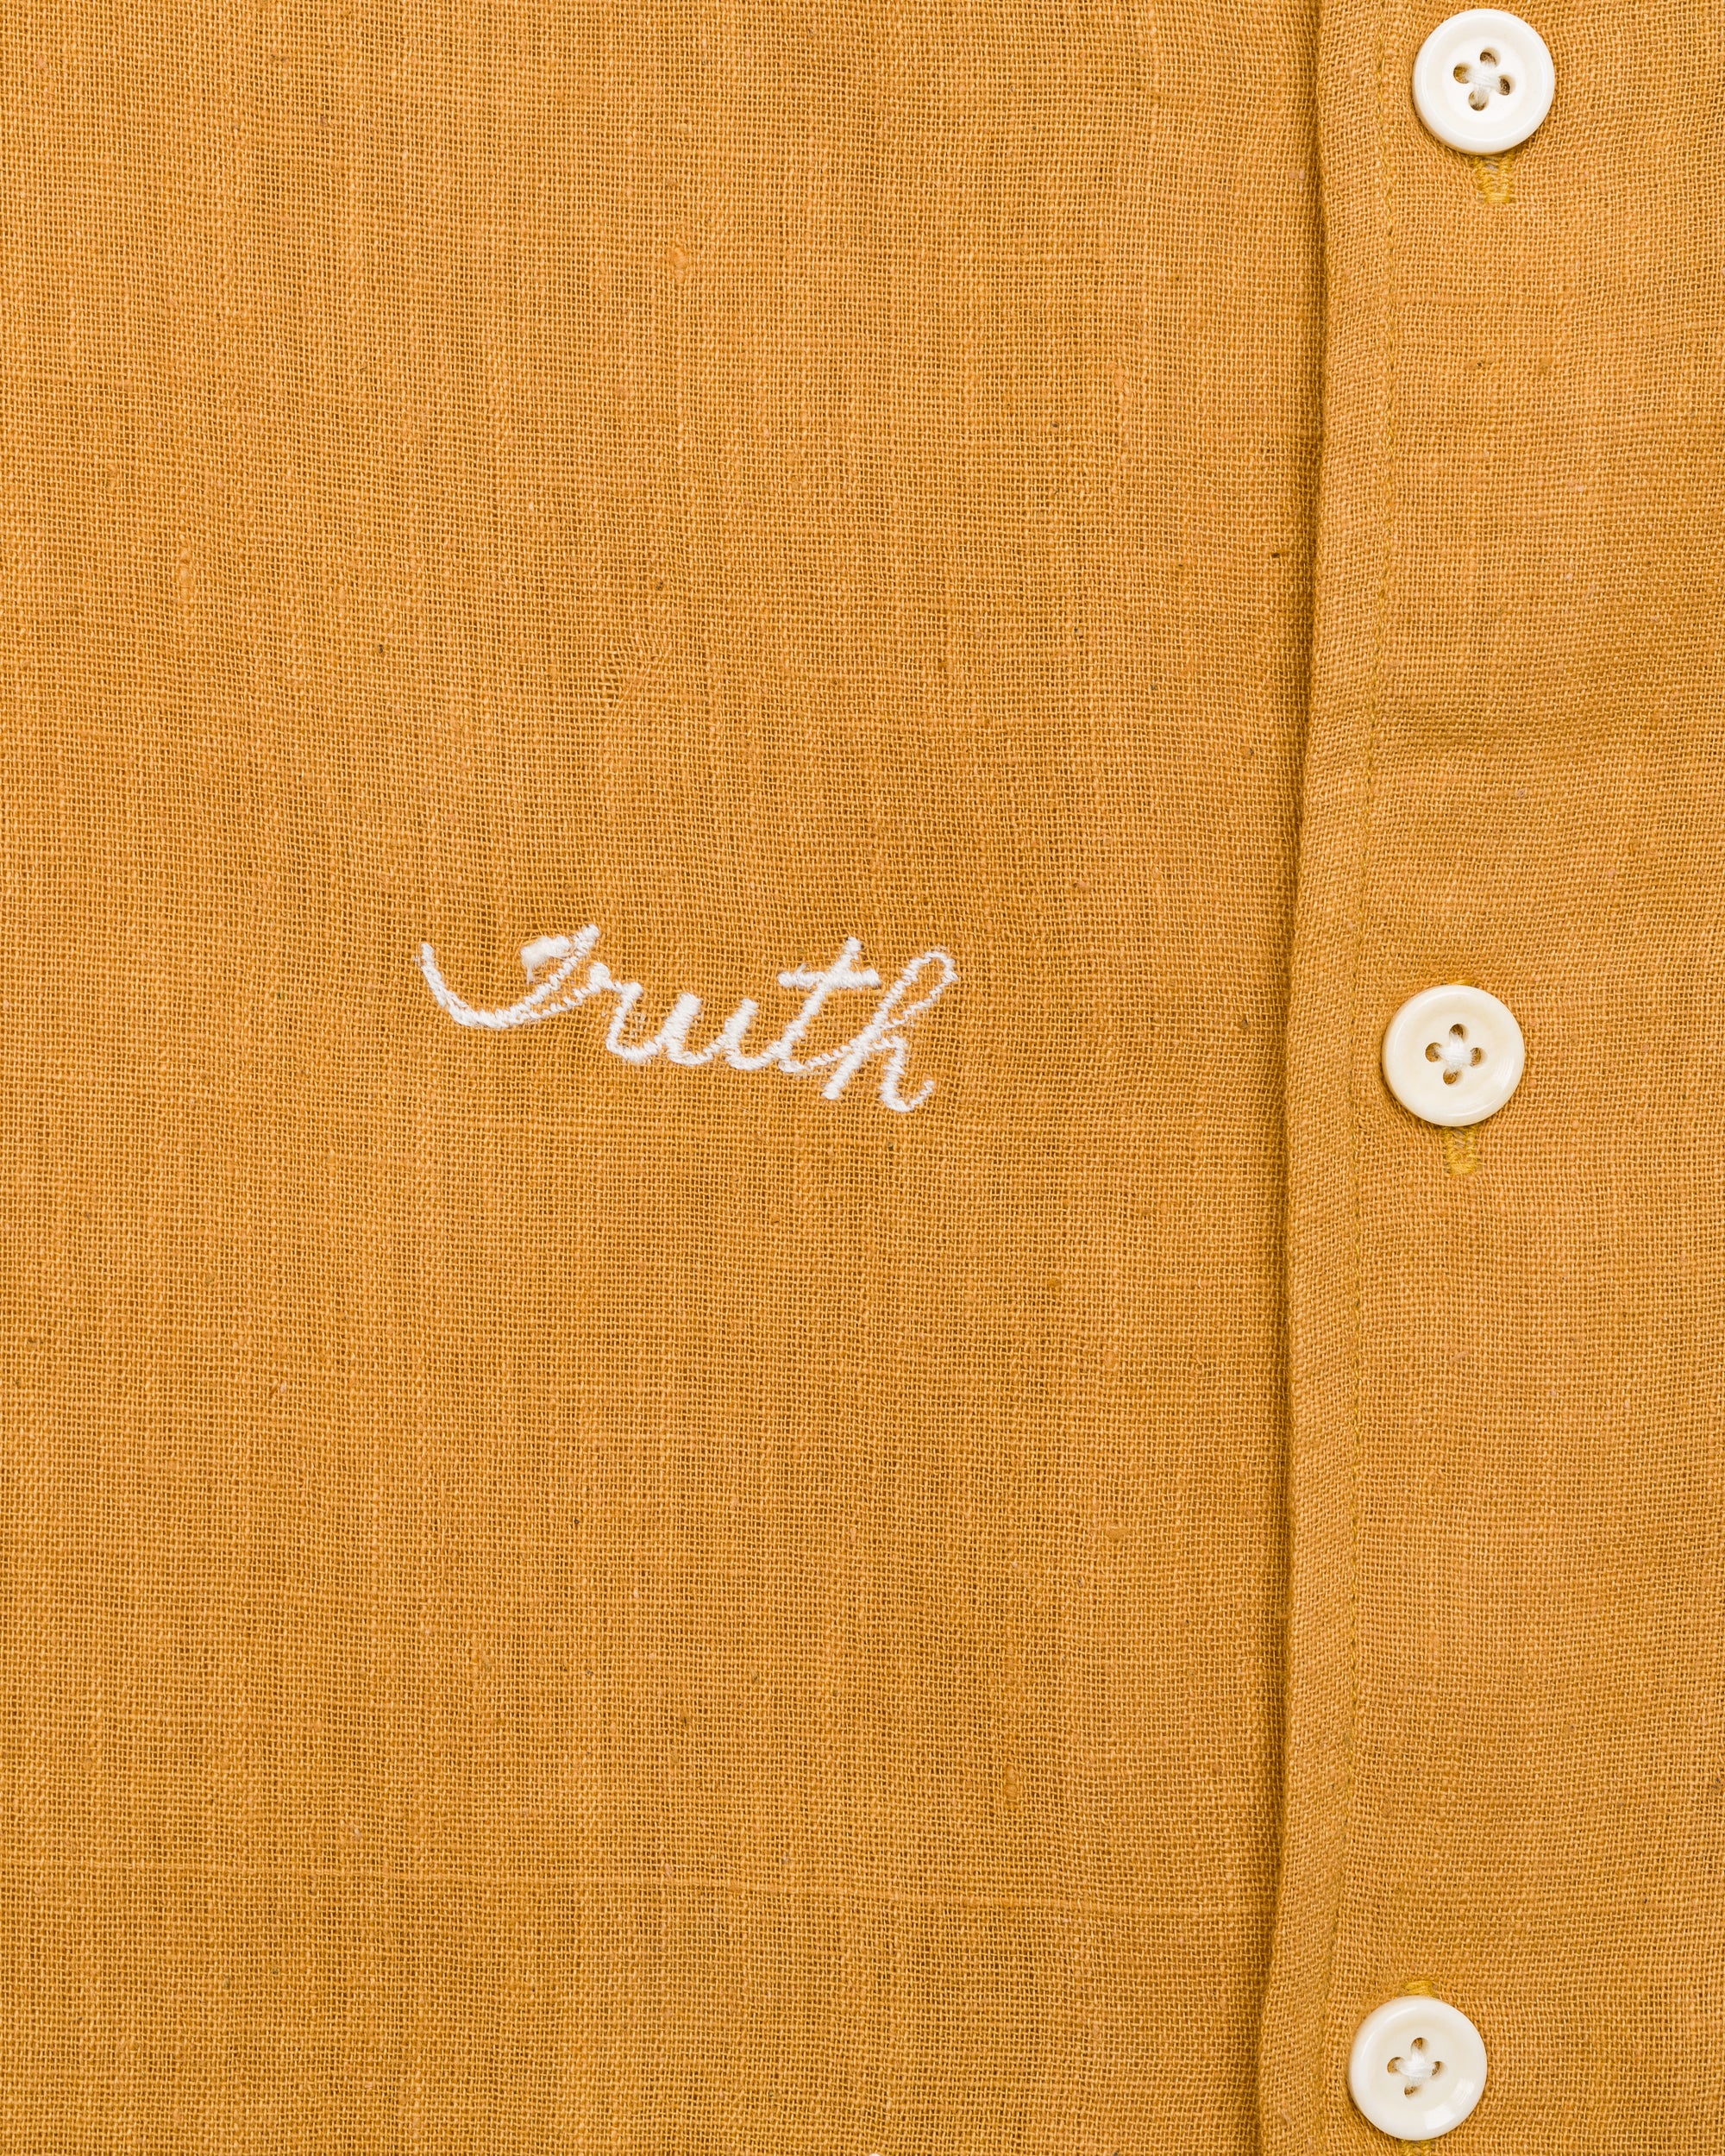 Khushi Camp Shirt in Turmeric Embroidered